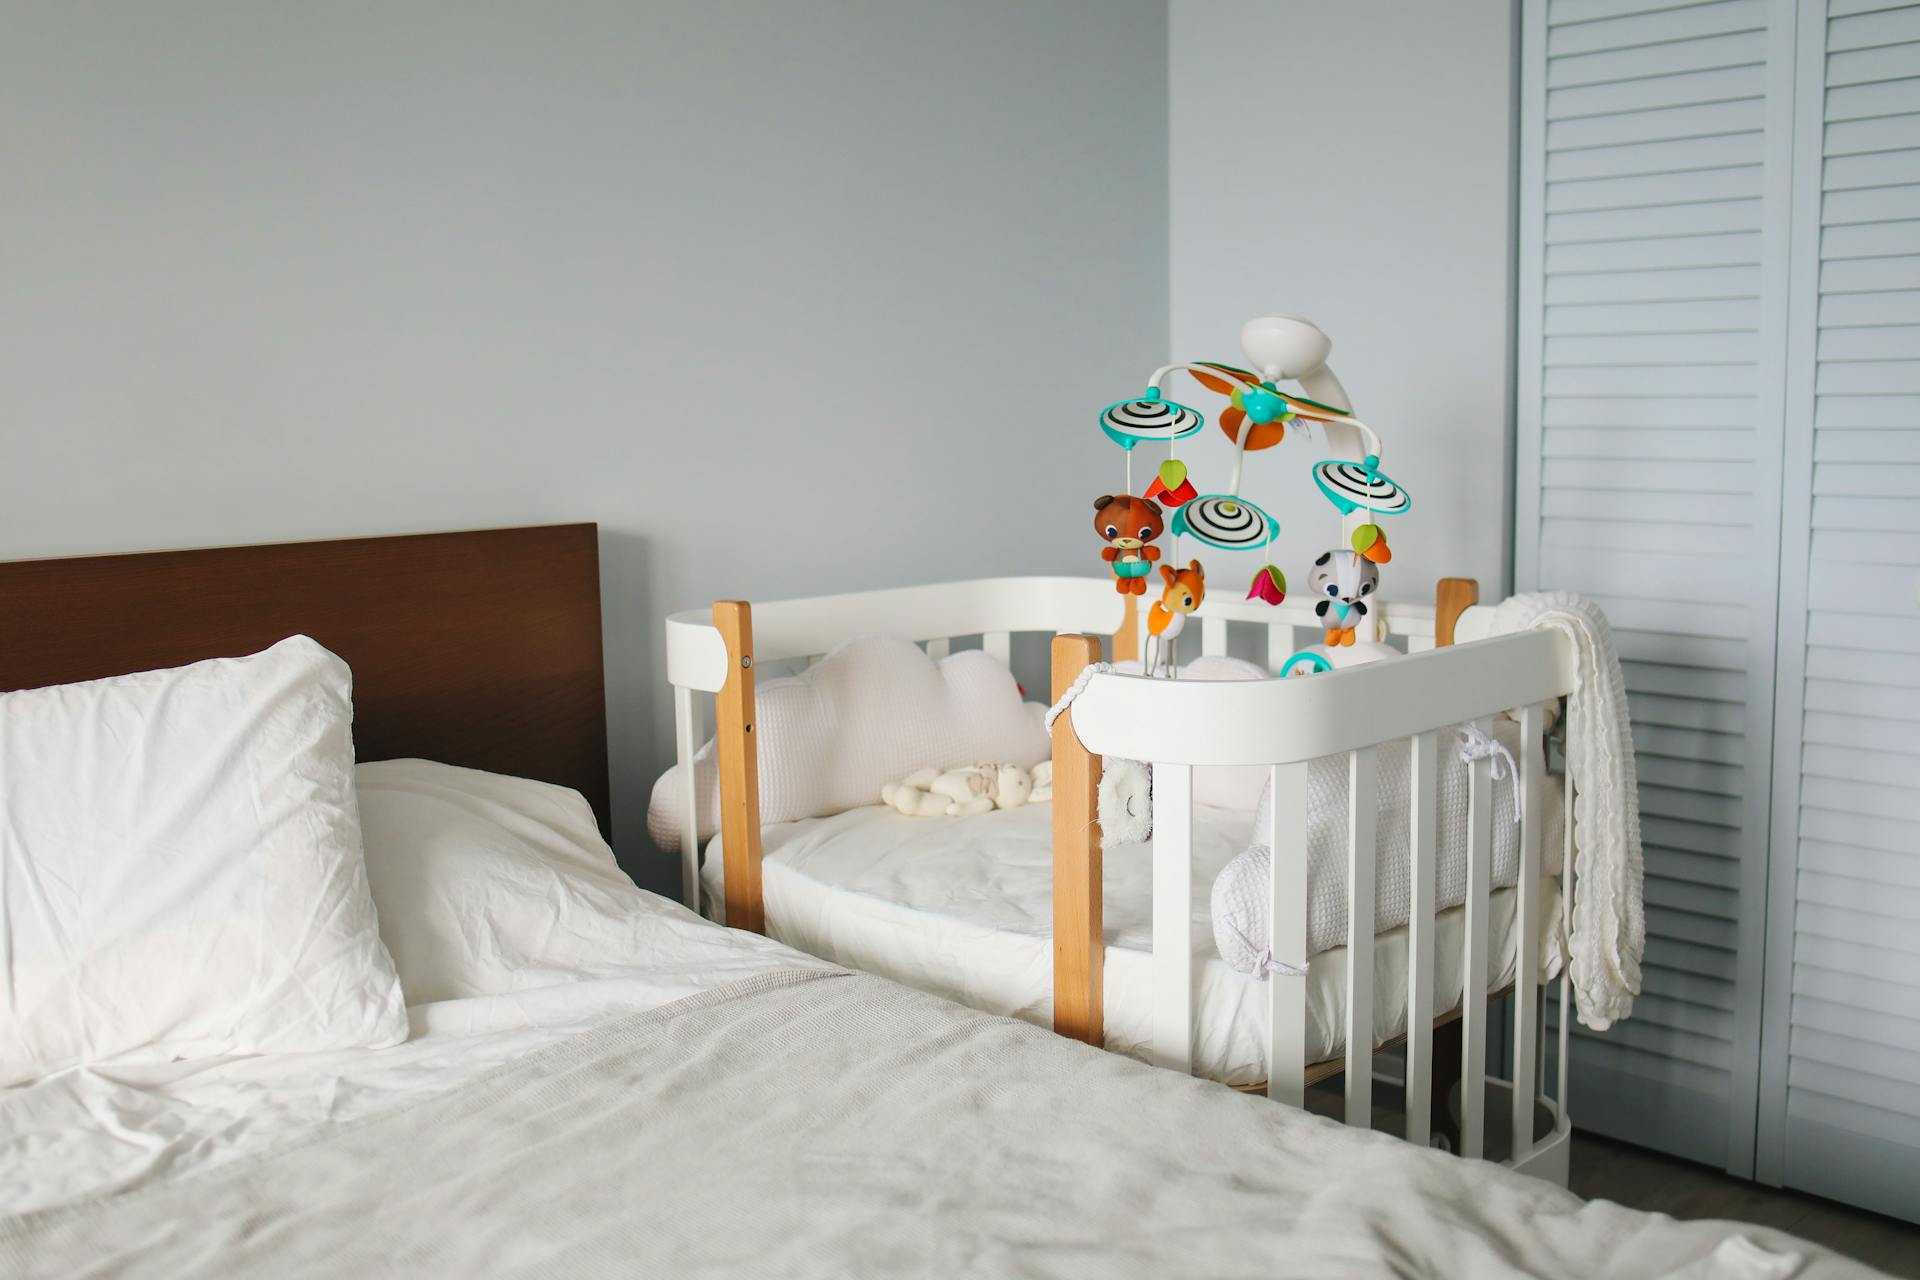 Crib placed next to bed | Source: Pexels